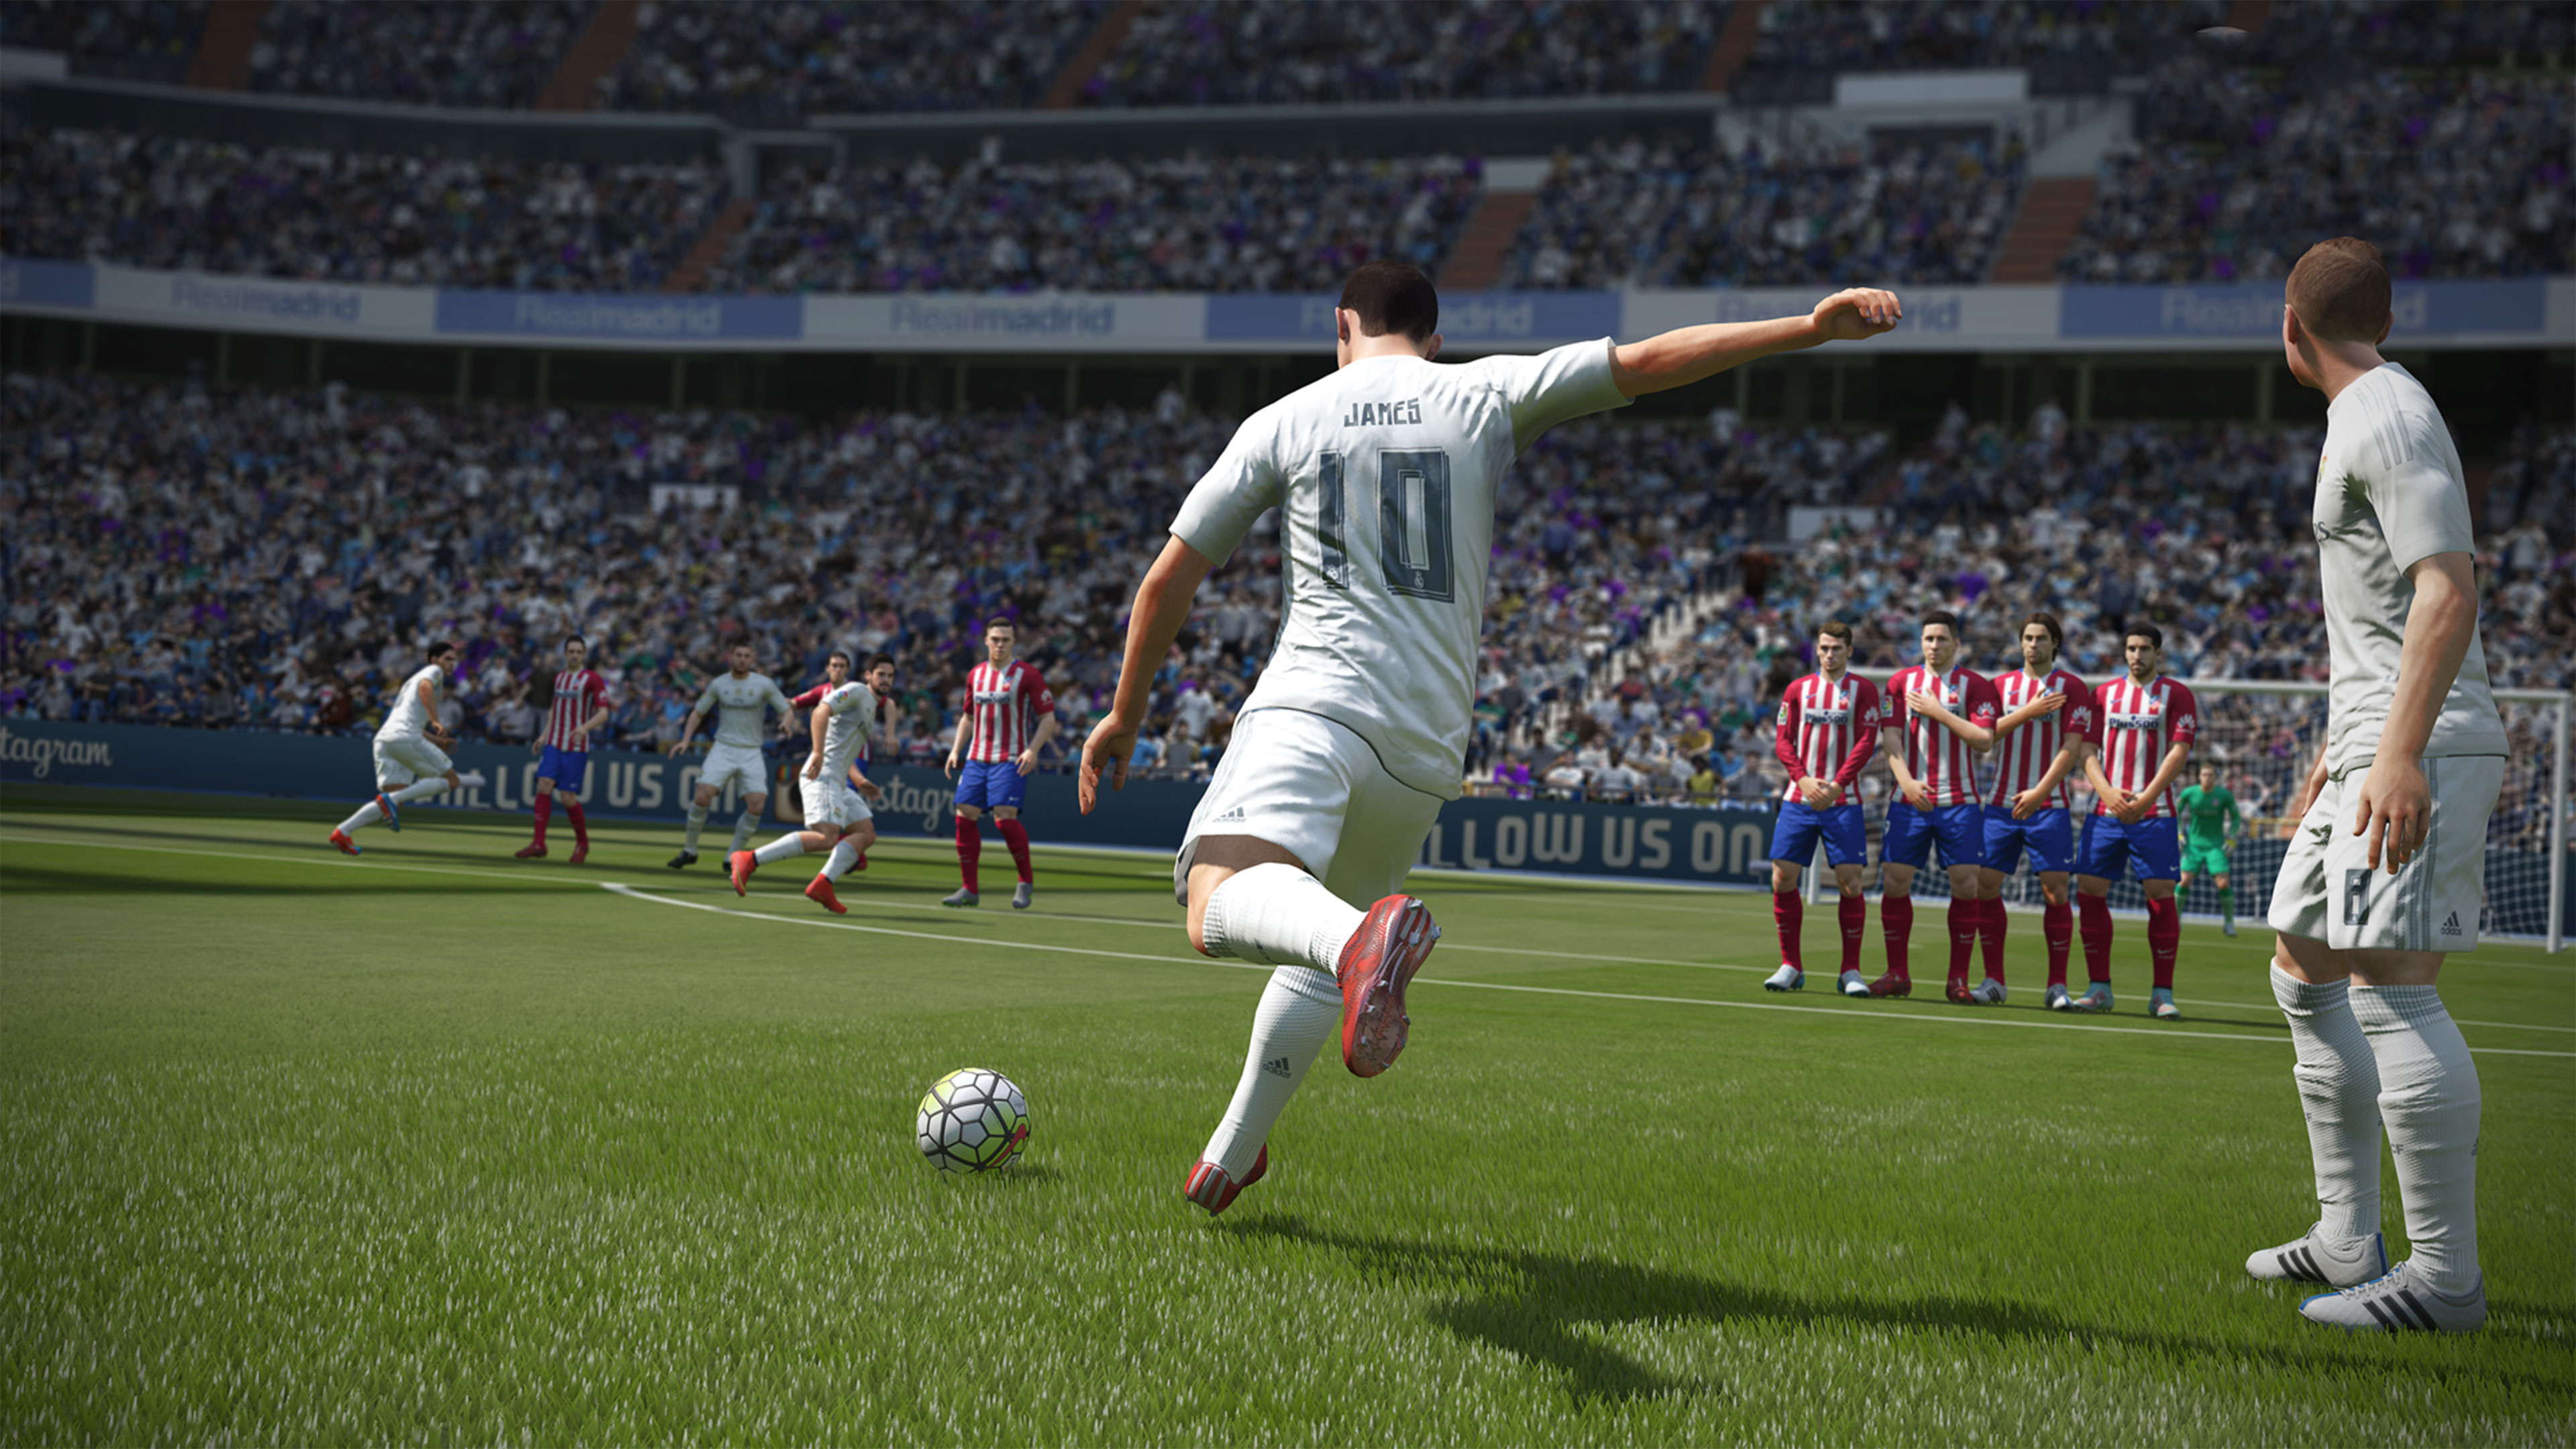 FIFA Soccer (Game): Authentic true-to-life action, A unique physics-based football simulator. 3840x2160 4K Background.